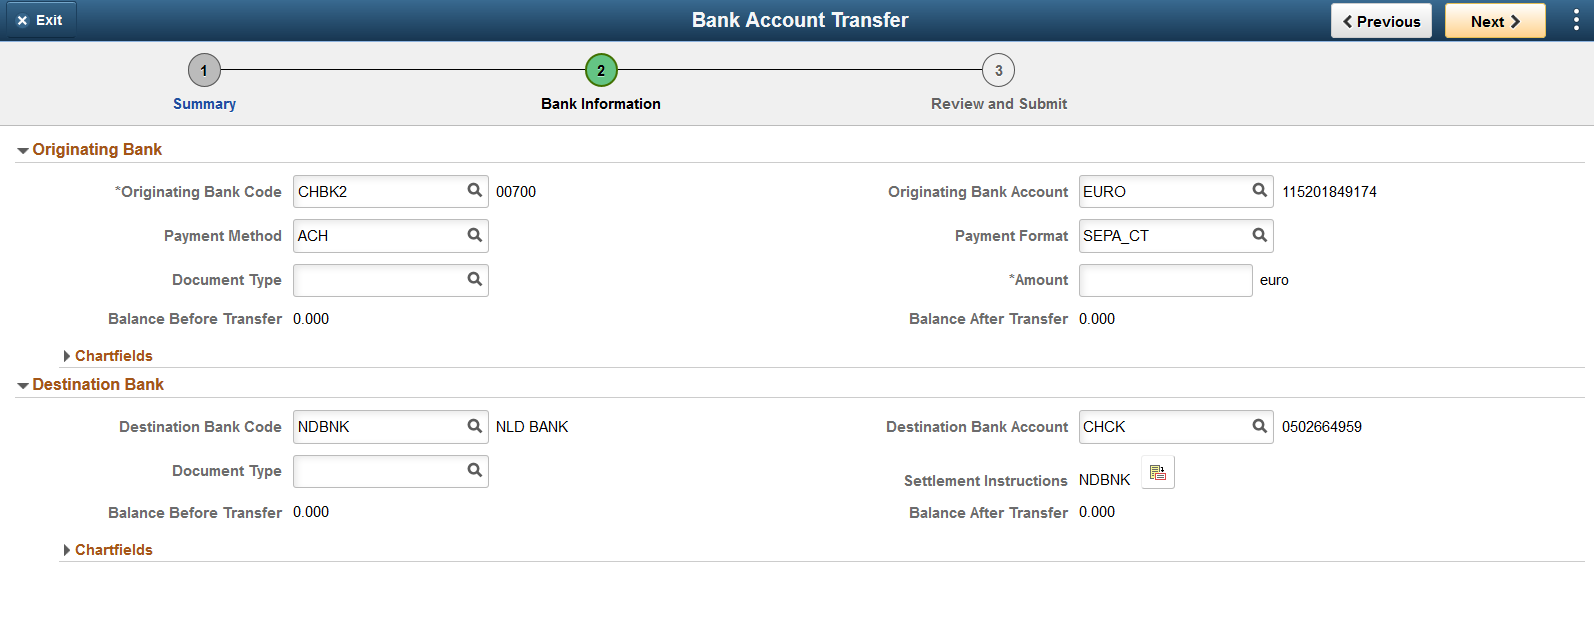 Bank Account Transfer - Bank Information Page